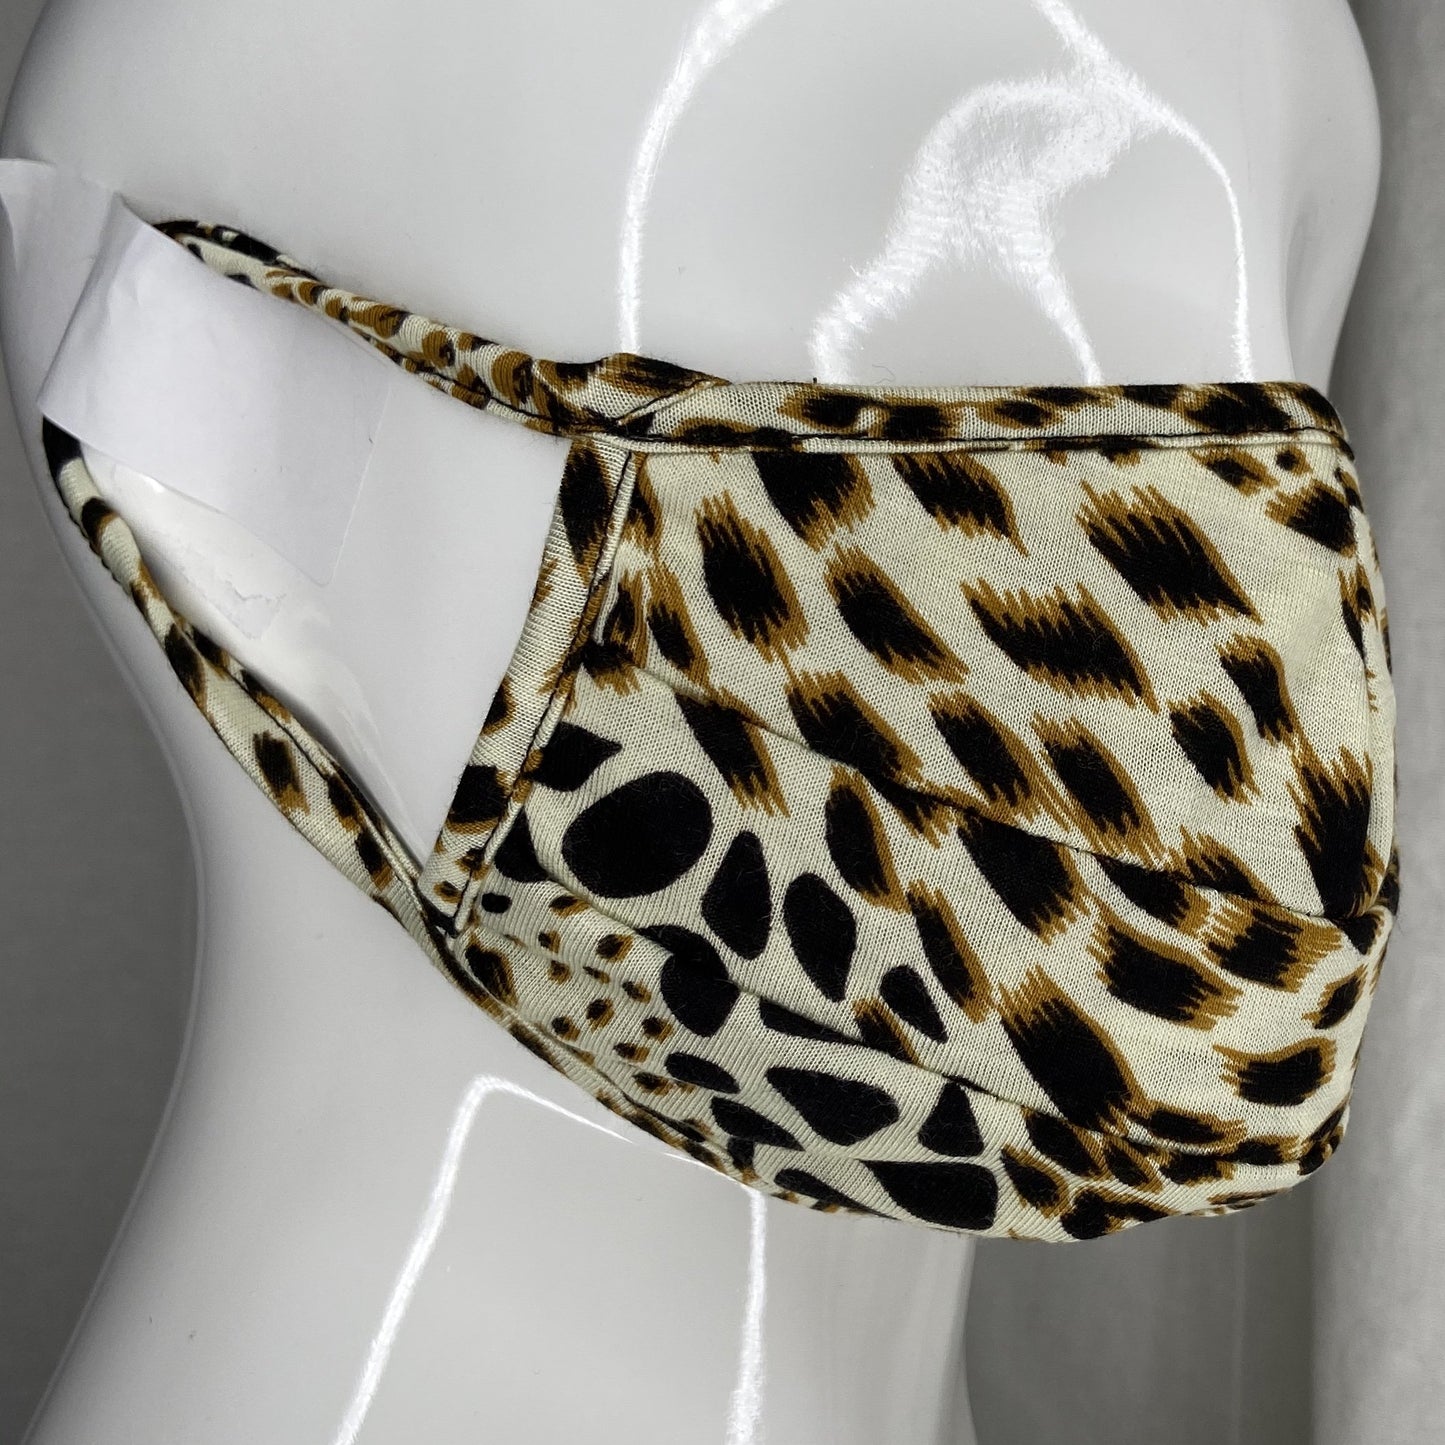 Fashion Mask (Tan Cheetah) In Stock-Boughie Curves-Boughie